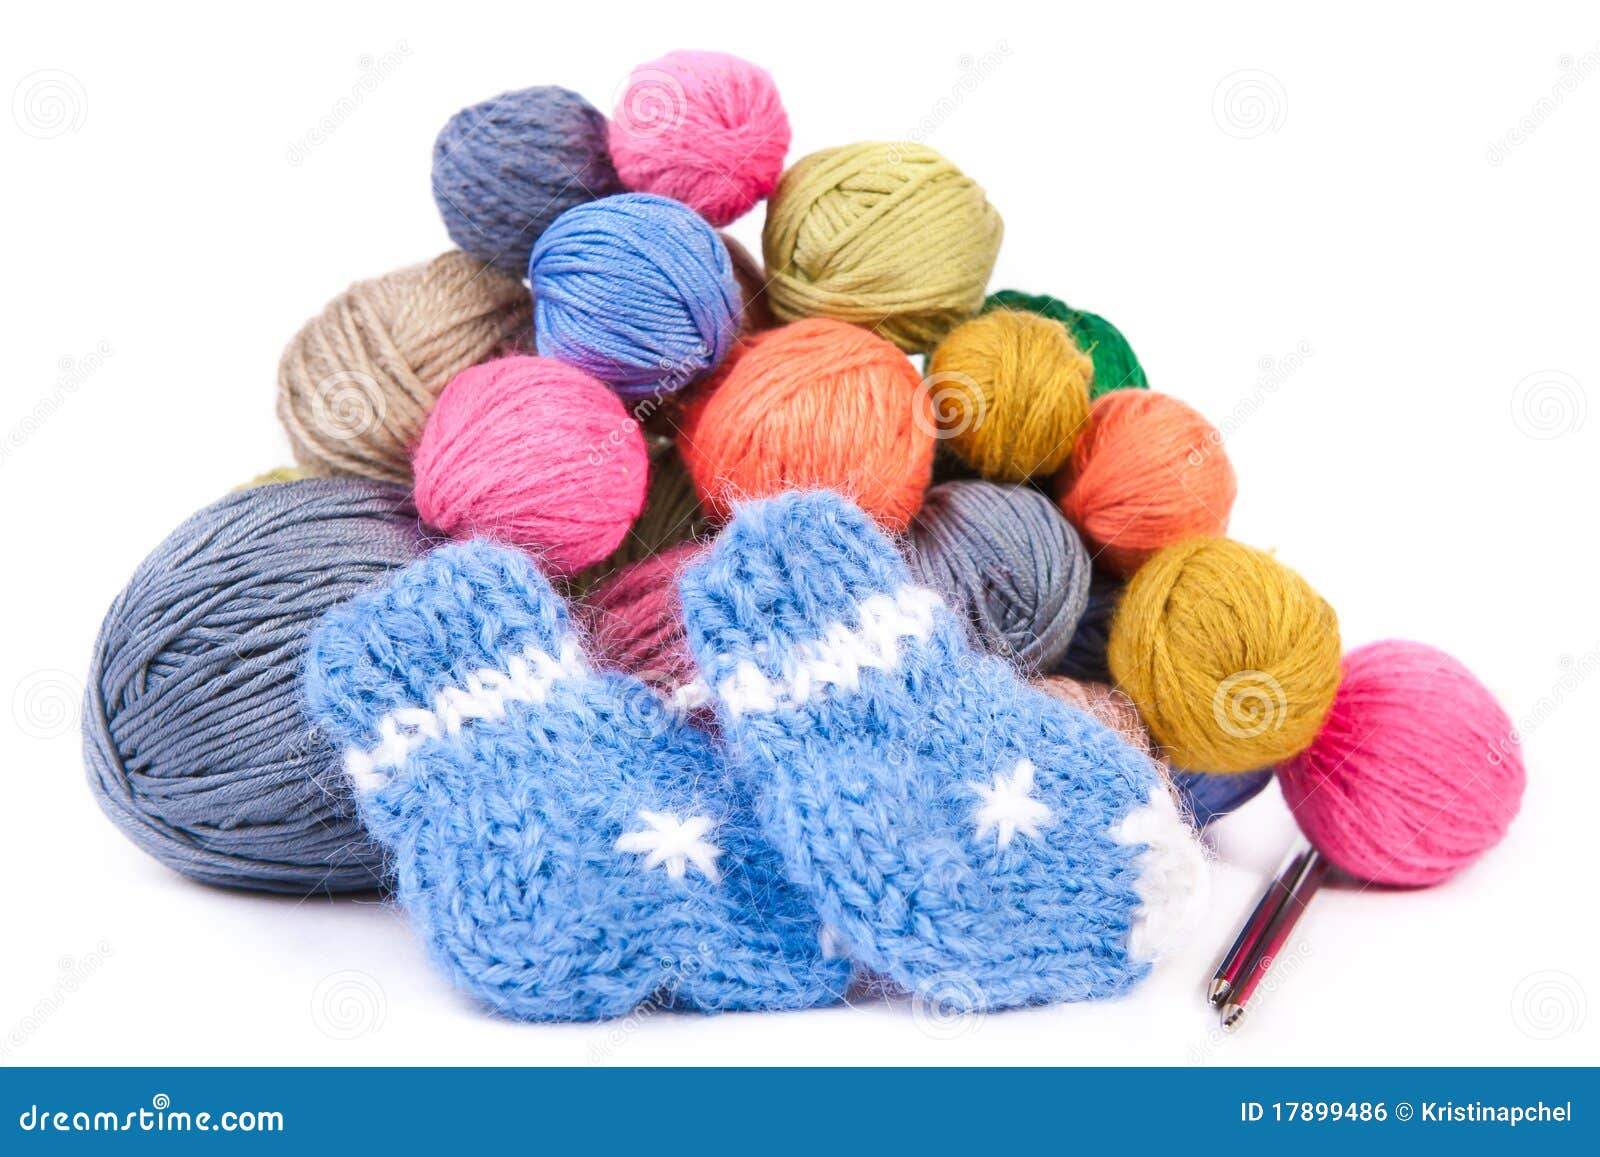 Pile Of Colorful Clews And Knitted Socks Royalty Free Stock Image ...